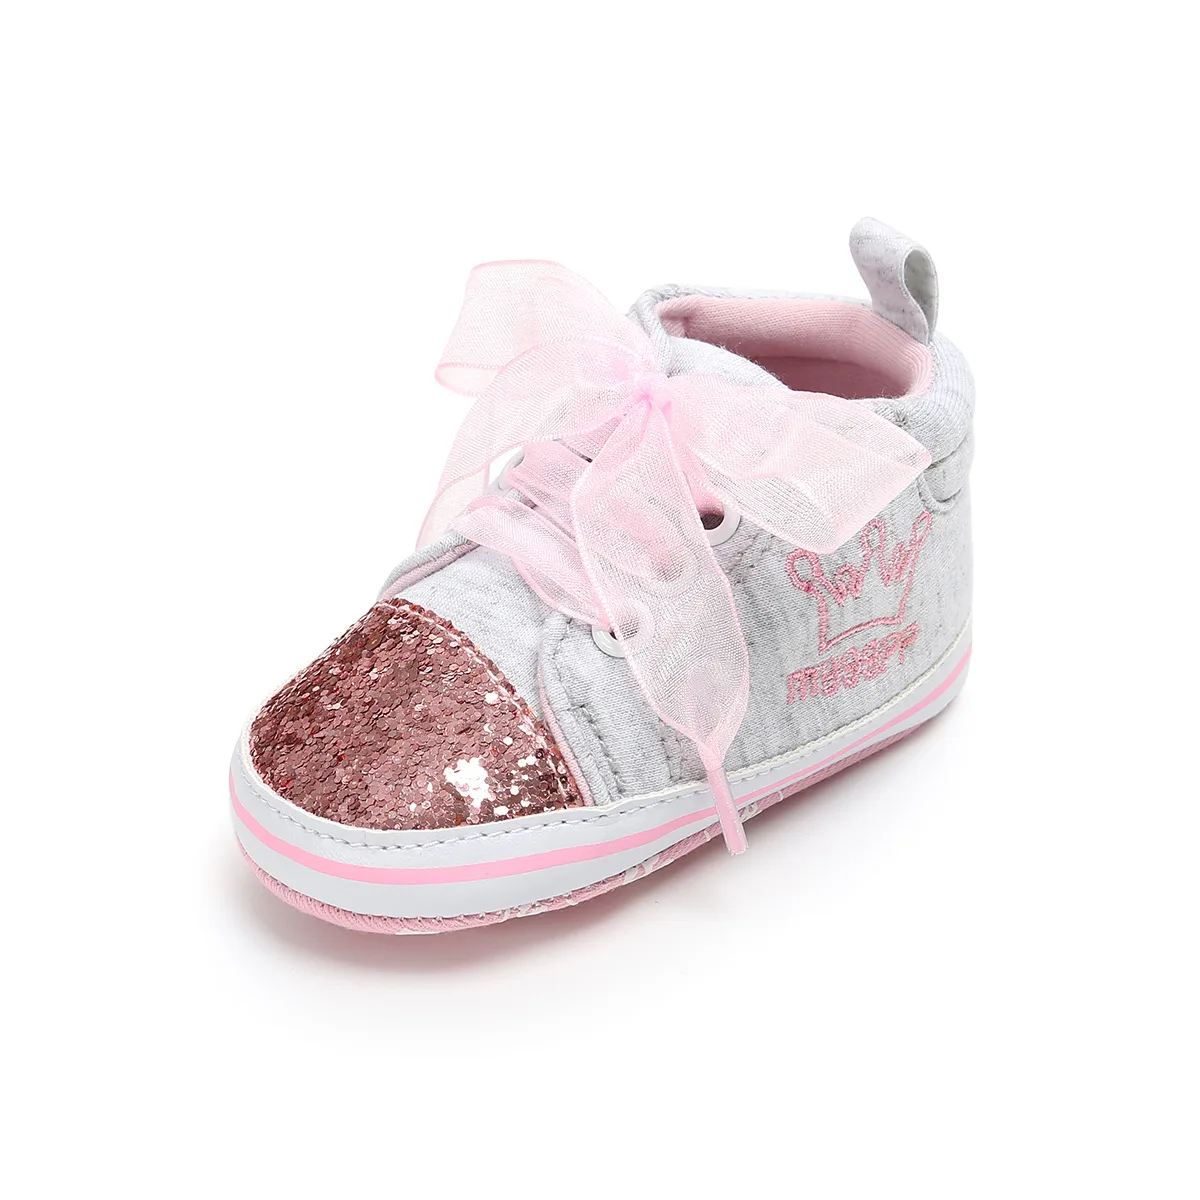 Princess Newborn Baby Girl Flower Anti-slip Crib Shoes Soft Sole Sneakers Shoes 